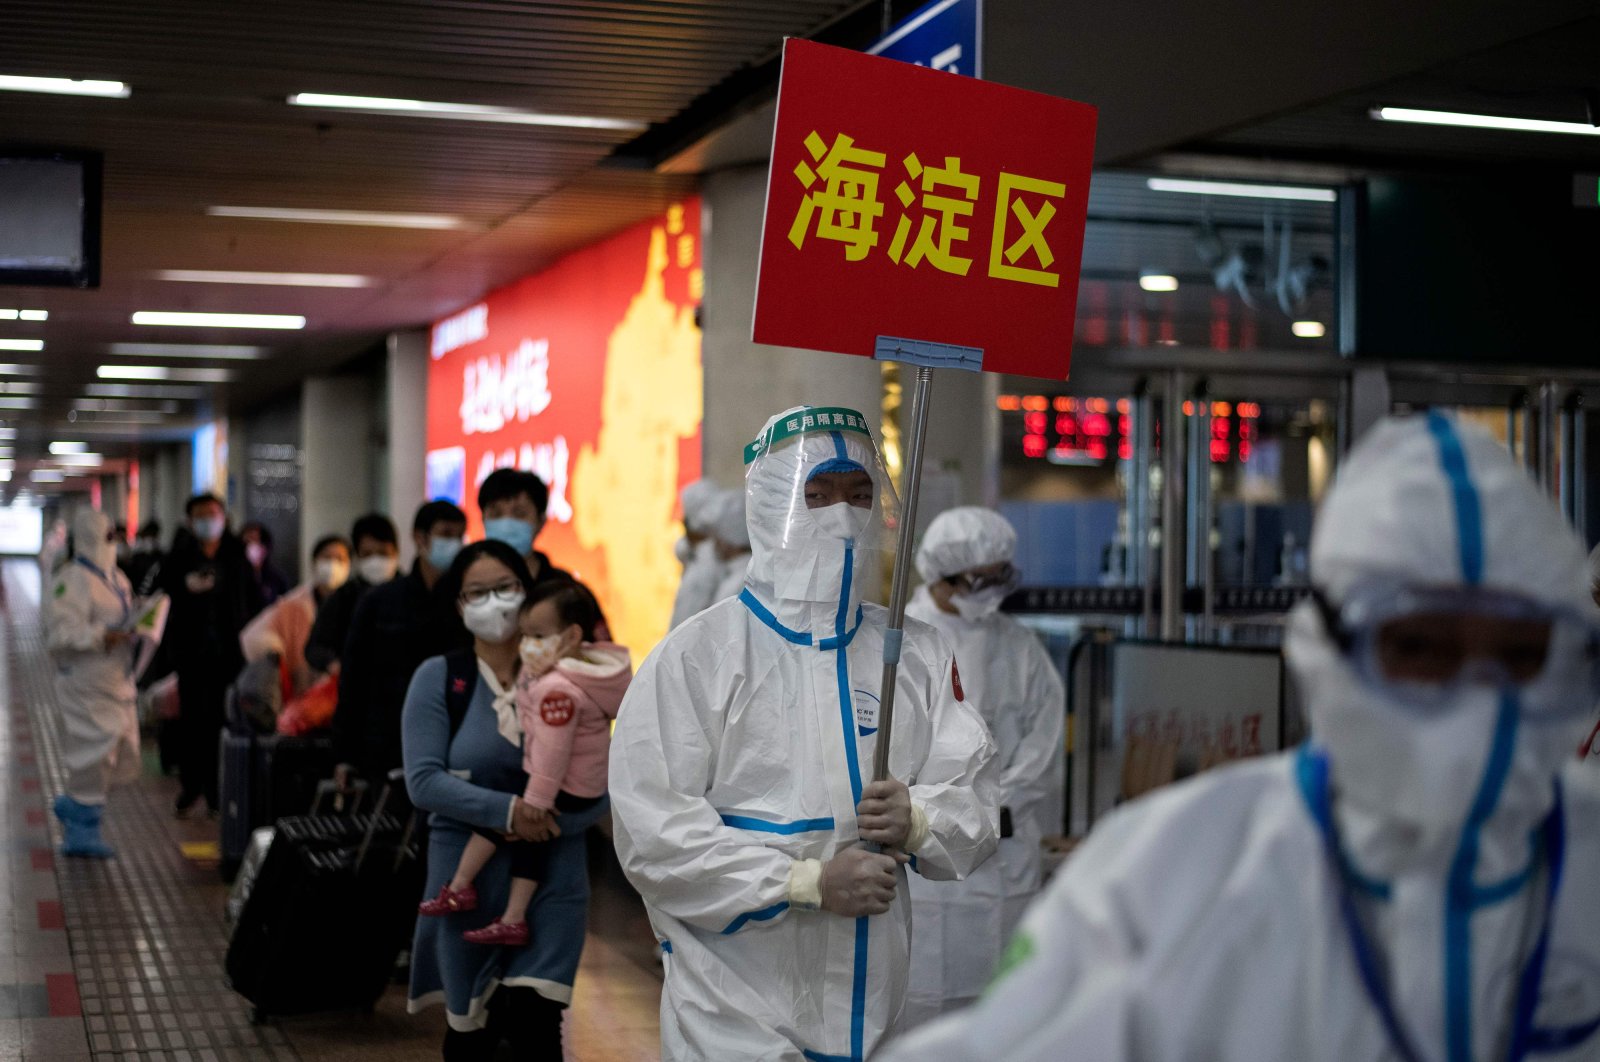 Transport personnel wearing hazmat suits guide travelers arriving from Wuhan to buses, which will take them to their quarantine locations, at Beijing West Railway Station, April 15, 2020. (AFP Photo)